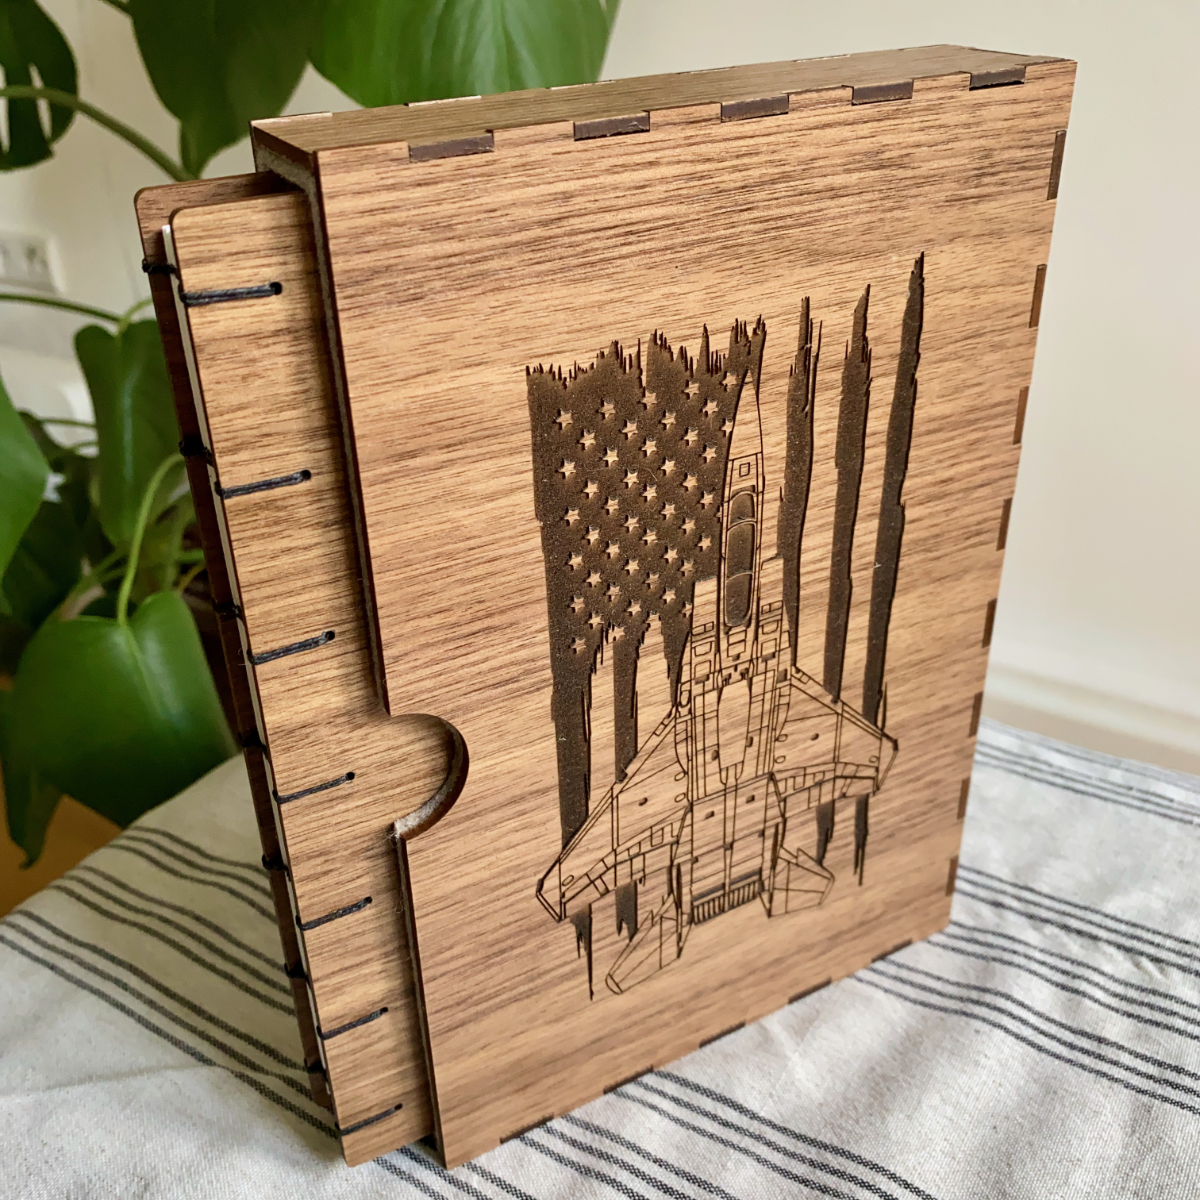 A retirement Fondfolio and slipcase for a US Air Force pilot. Walnut wooden covers, coptic bound, the book is pictured in its slip case engraved with a Fighter Jet with an American flag behind it.